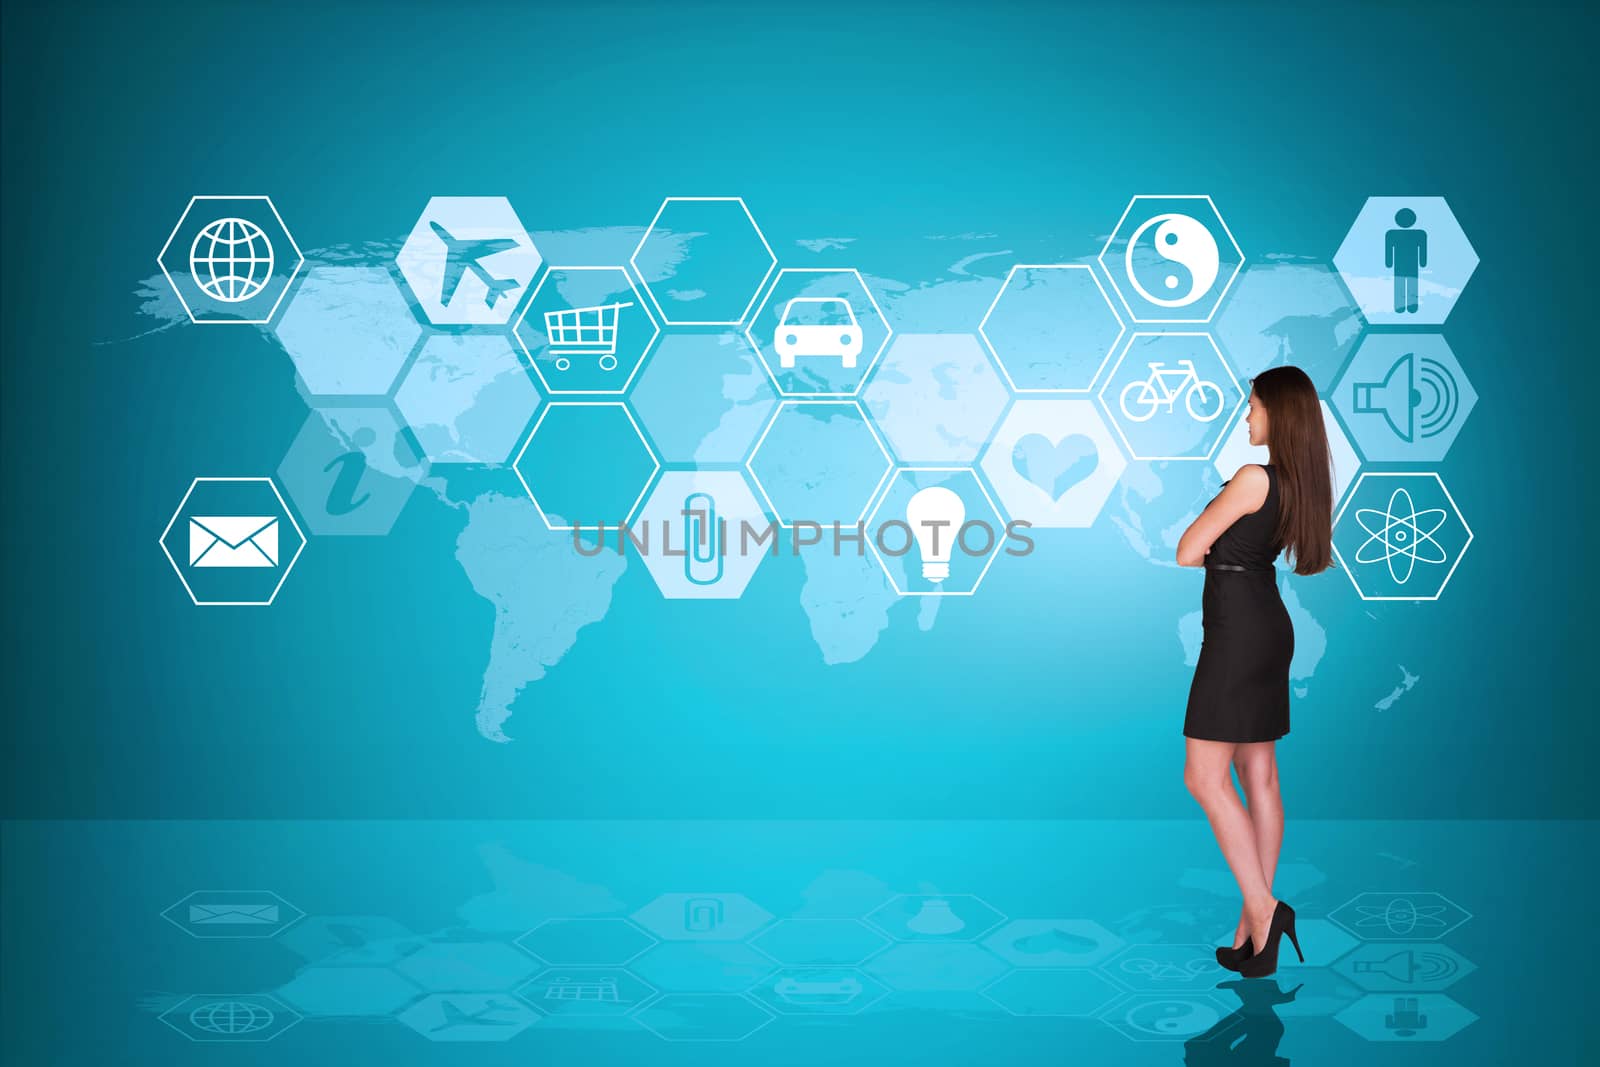 Businesslady half-turned in black dress with crossed arms in front of holographic screen with icons, back view